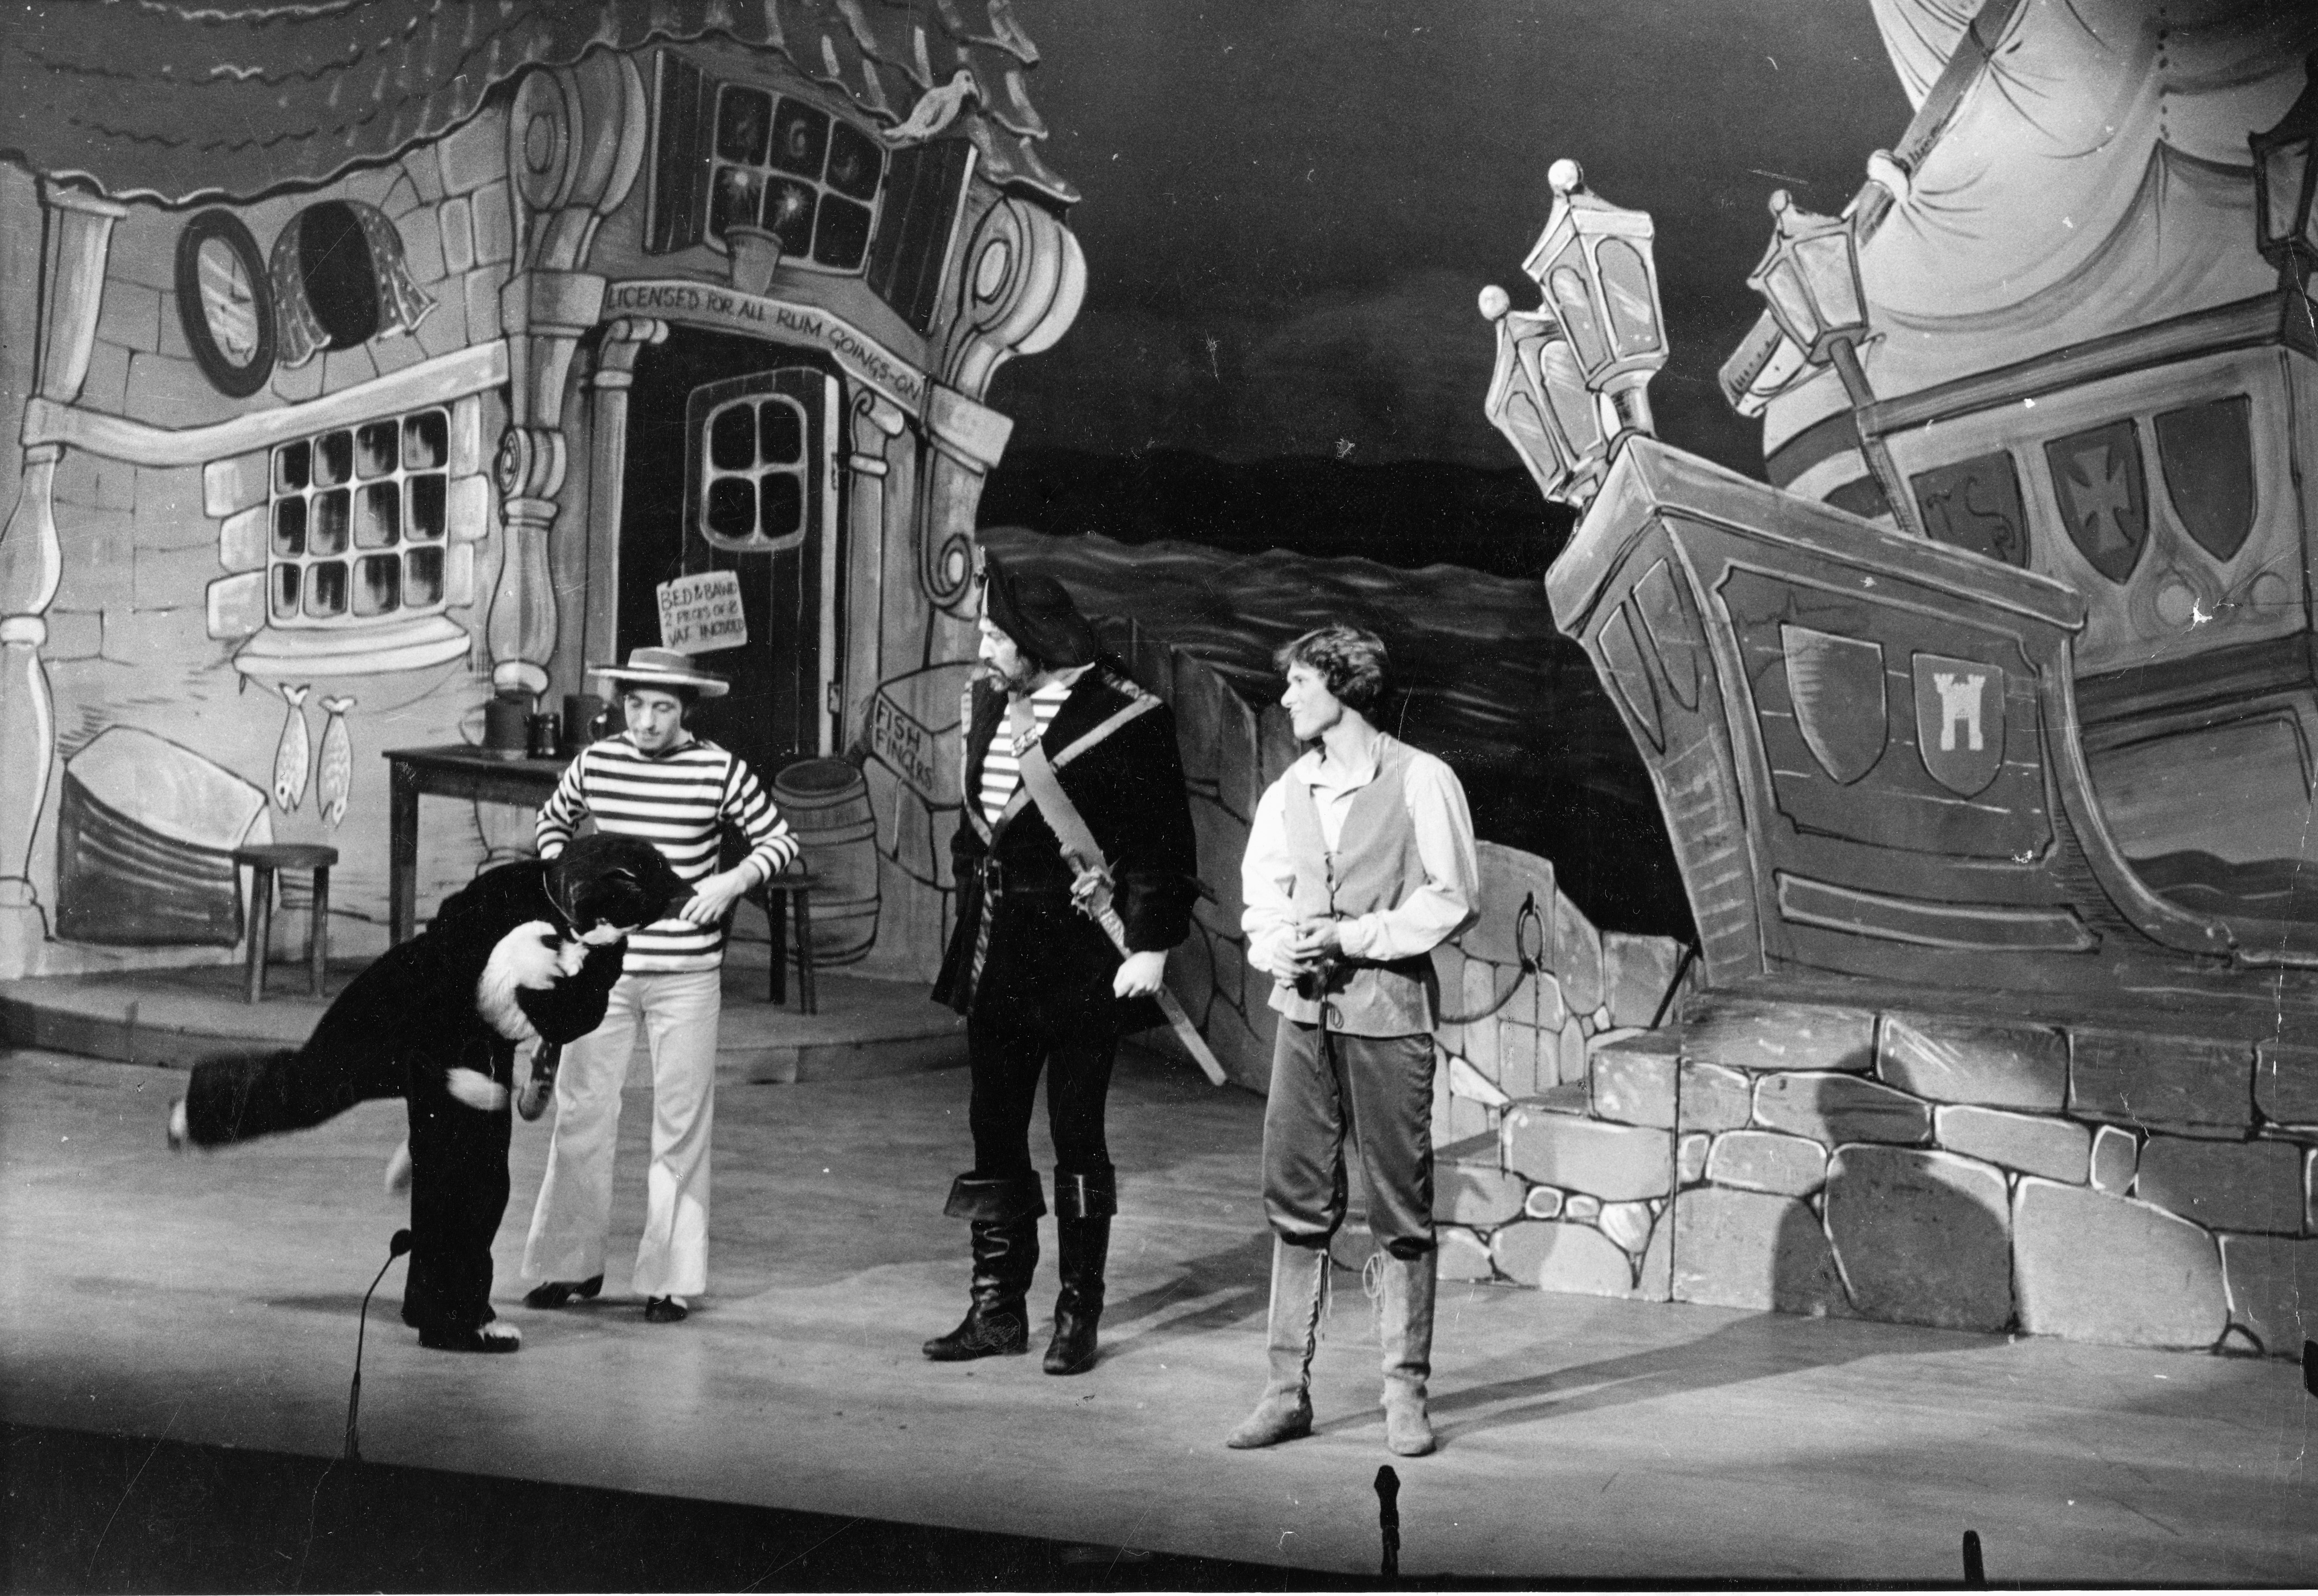 A scene from the Inverness panto in 1976.